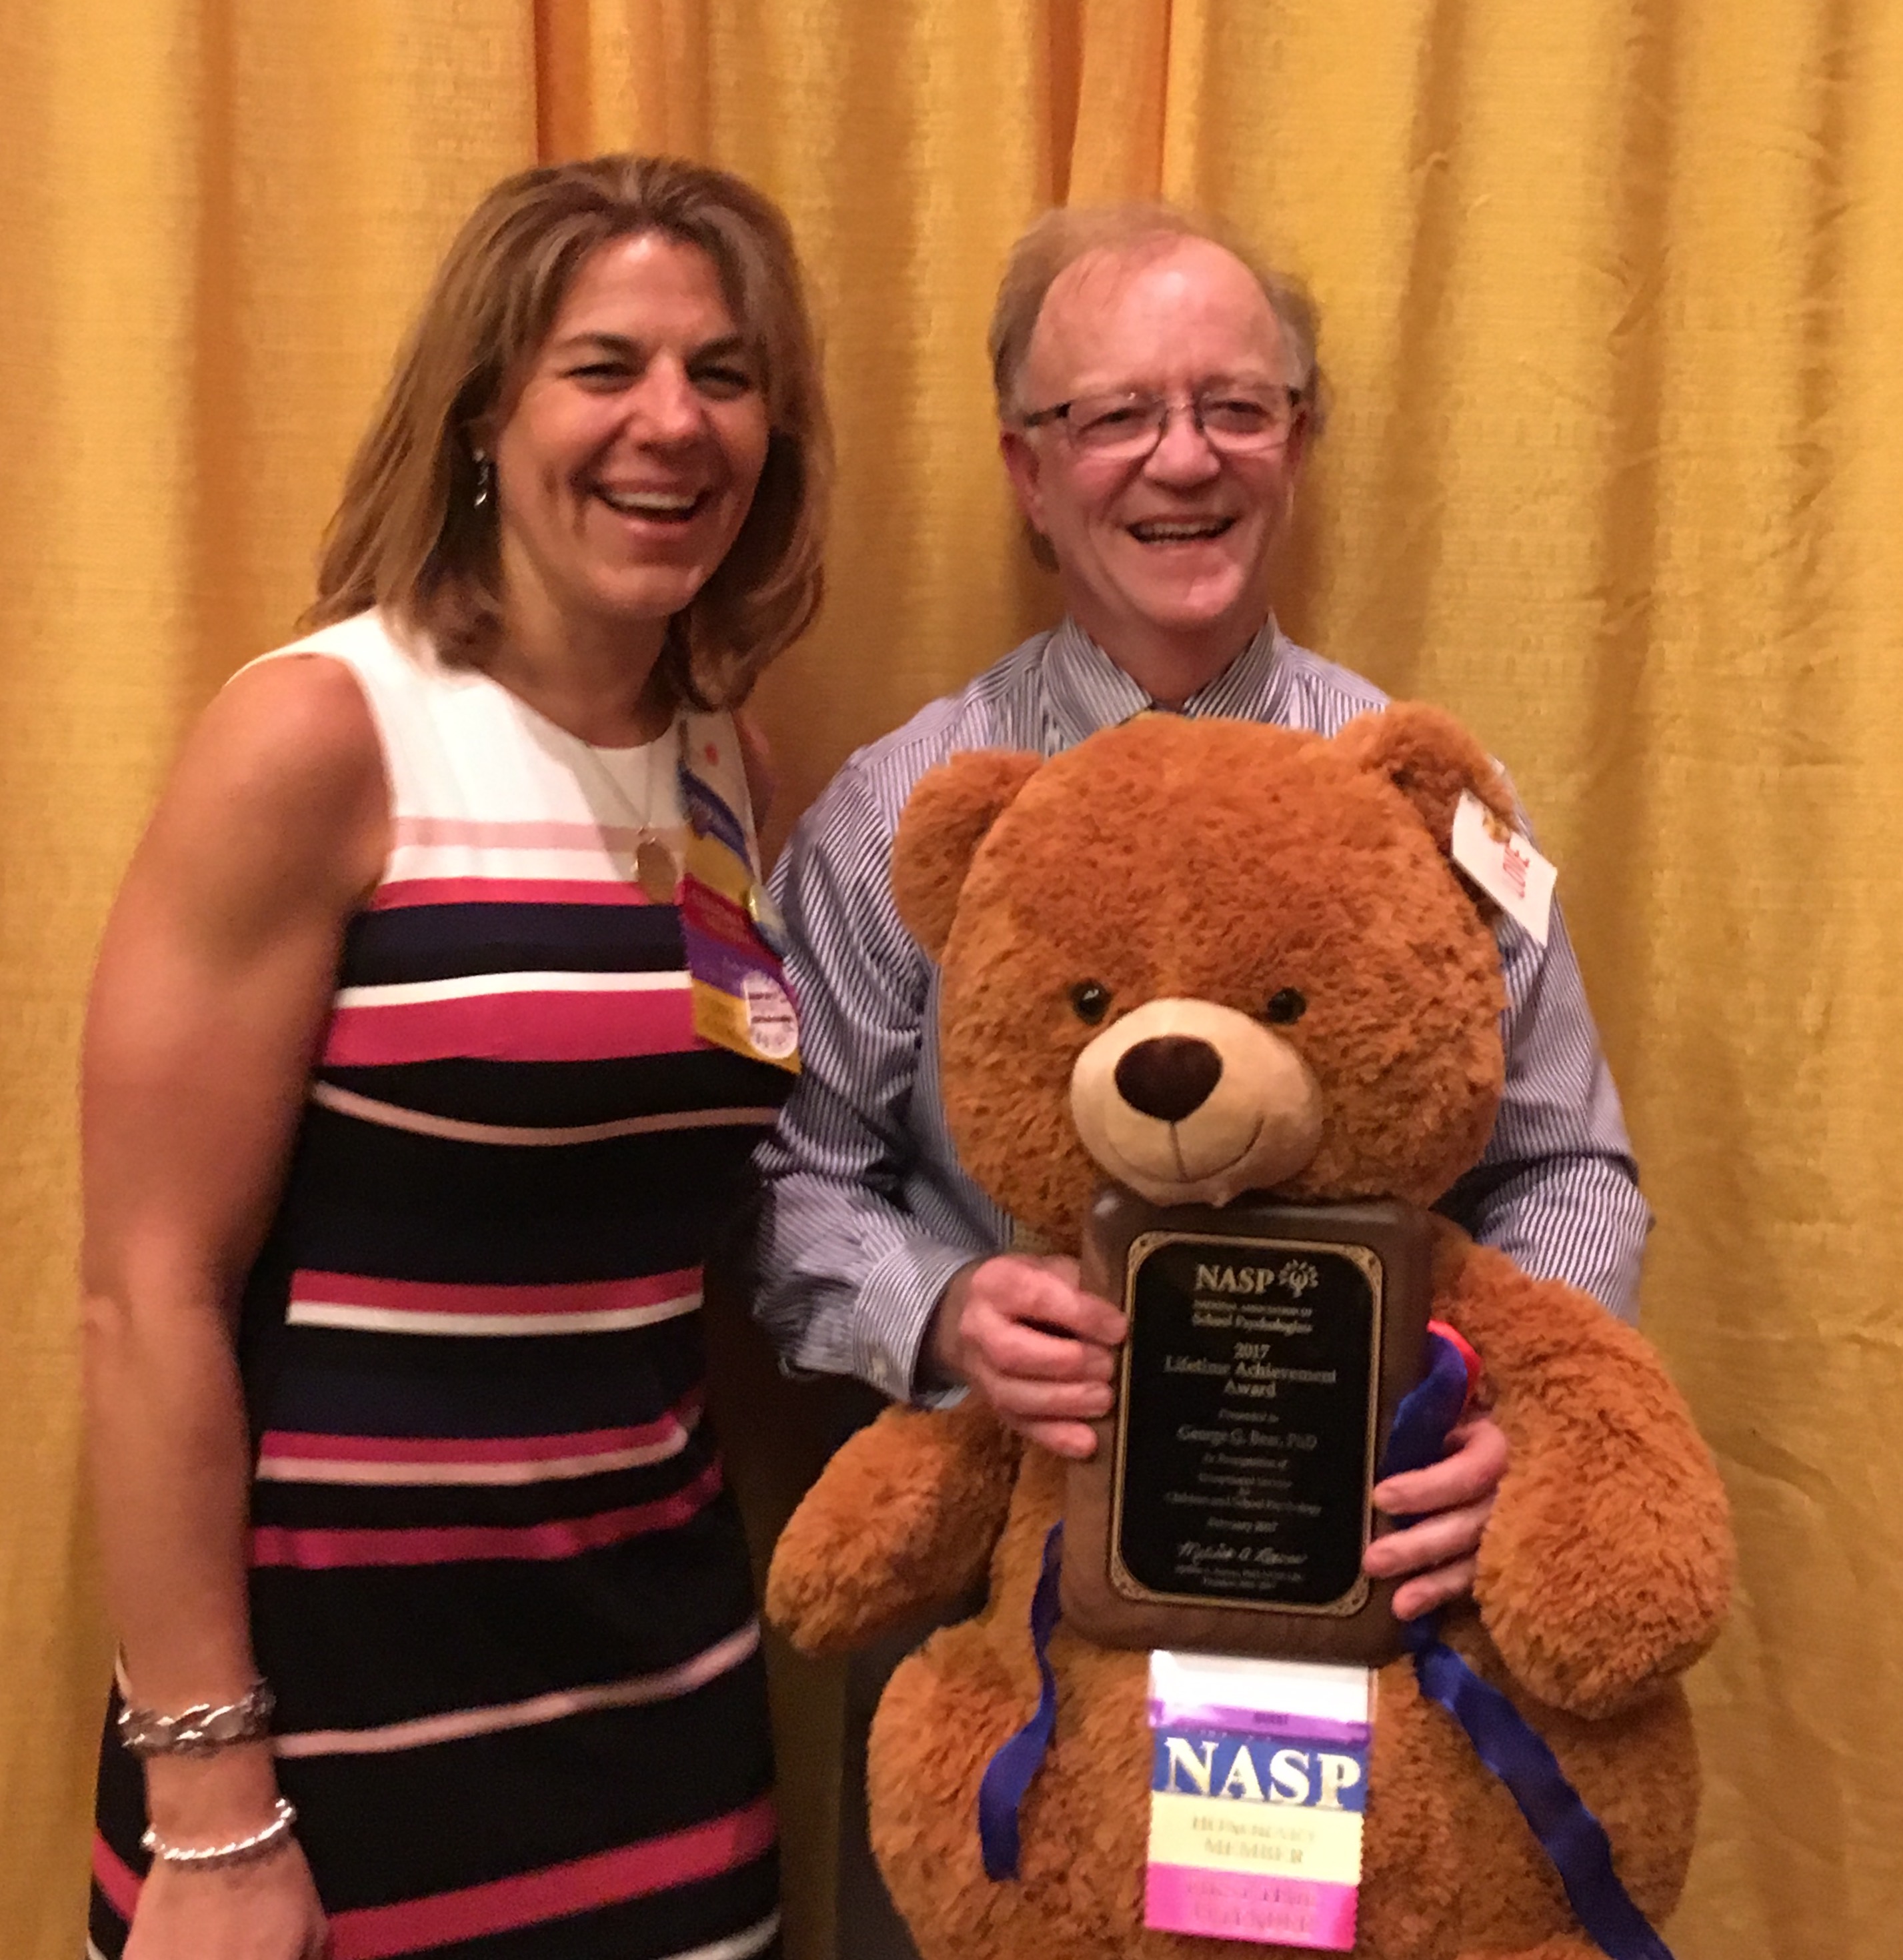 George Bear with Melissa Reeves, president of the National Association of School Psychologists